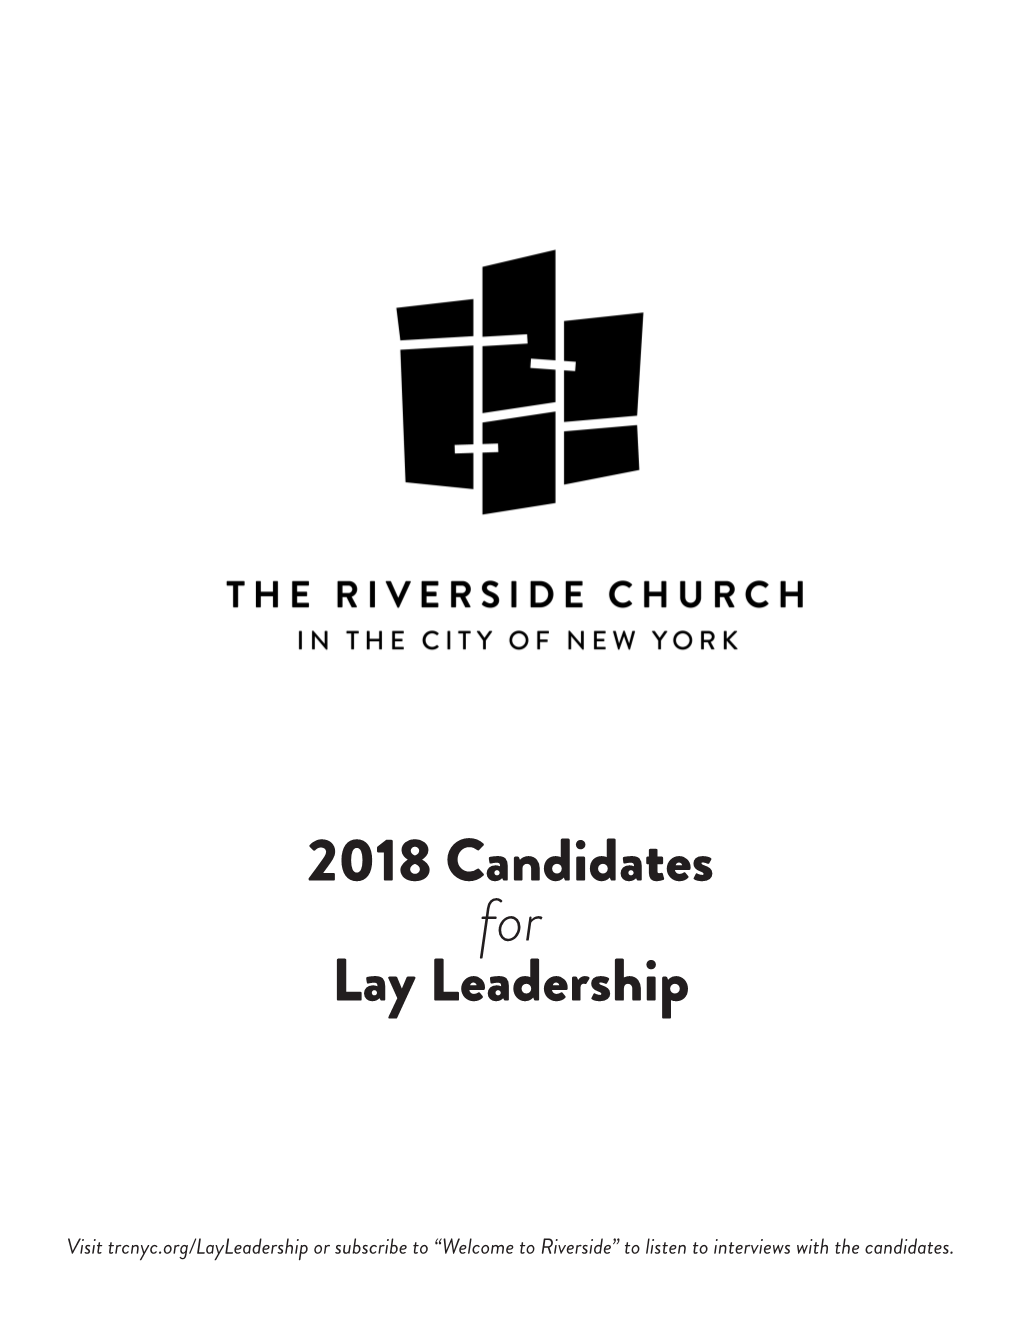 2018 Candidates for Lay Leadership